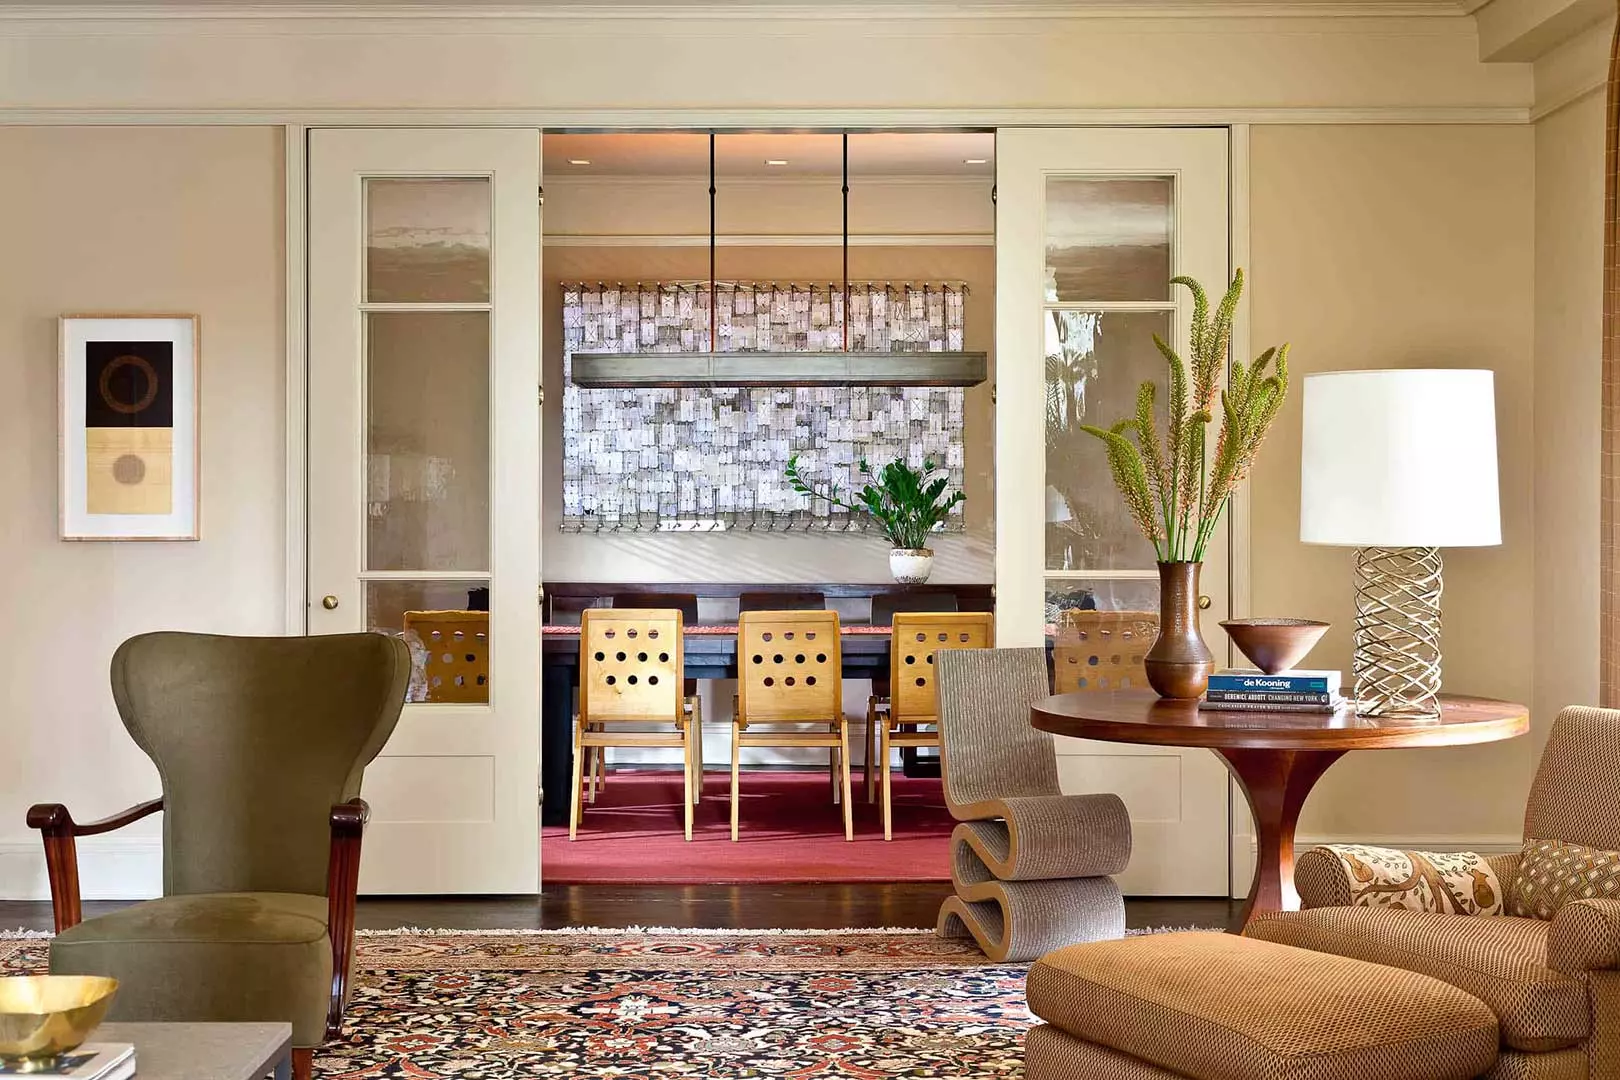 An eclectic array of furniture marks the transition from living room to dining room, the latter seen through wide French doors. In the Living Room, an antique Italian armchair by Ulrich Guglielmo, Italy from the 1950's echoes the curves of the Danish Modern rosewood pedestal table, the Frank Gehry Wiggle Chair, and Herve van der Straeten's "Tornade" lamp.